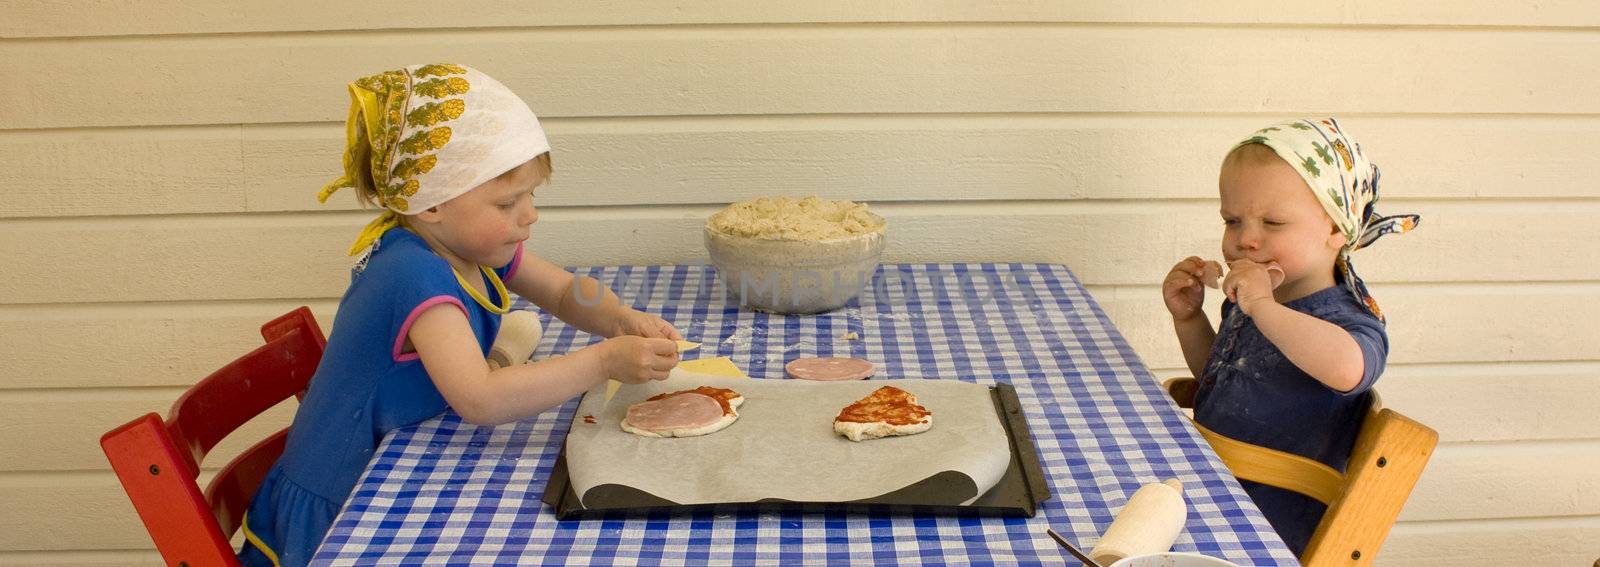 Small girls (2 and 3 years old) baking pizza